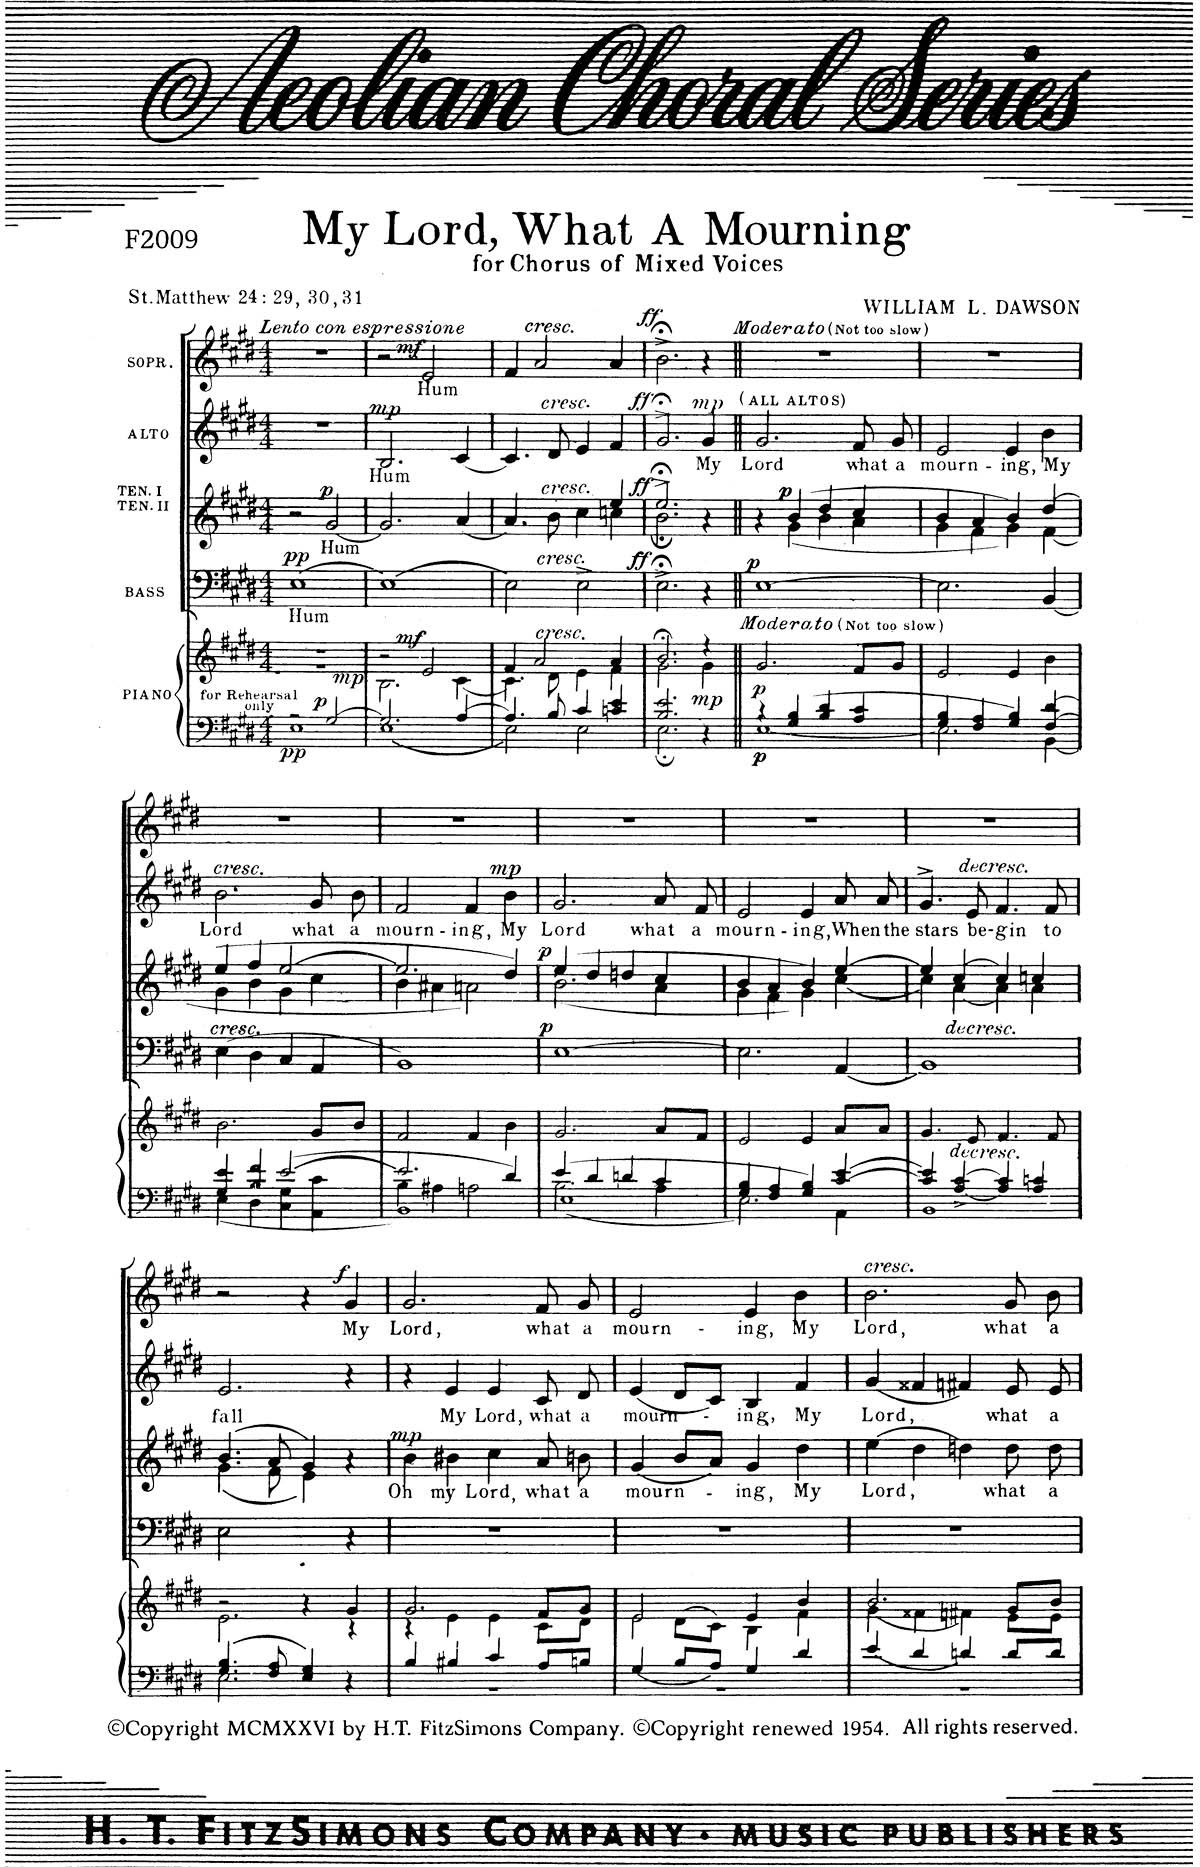 My Lord  What a Mourning: SATB: Vocal Score